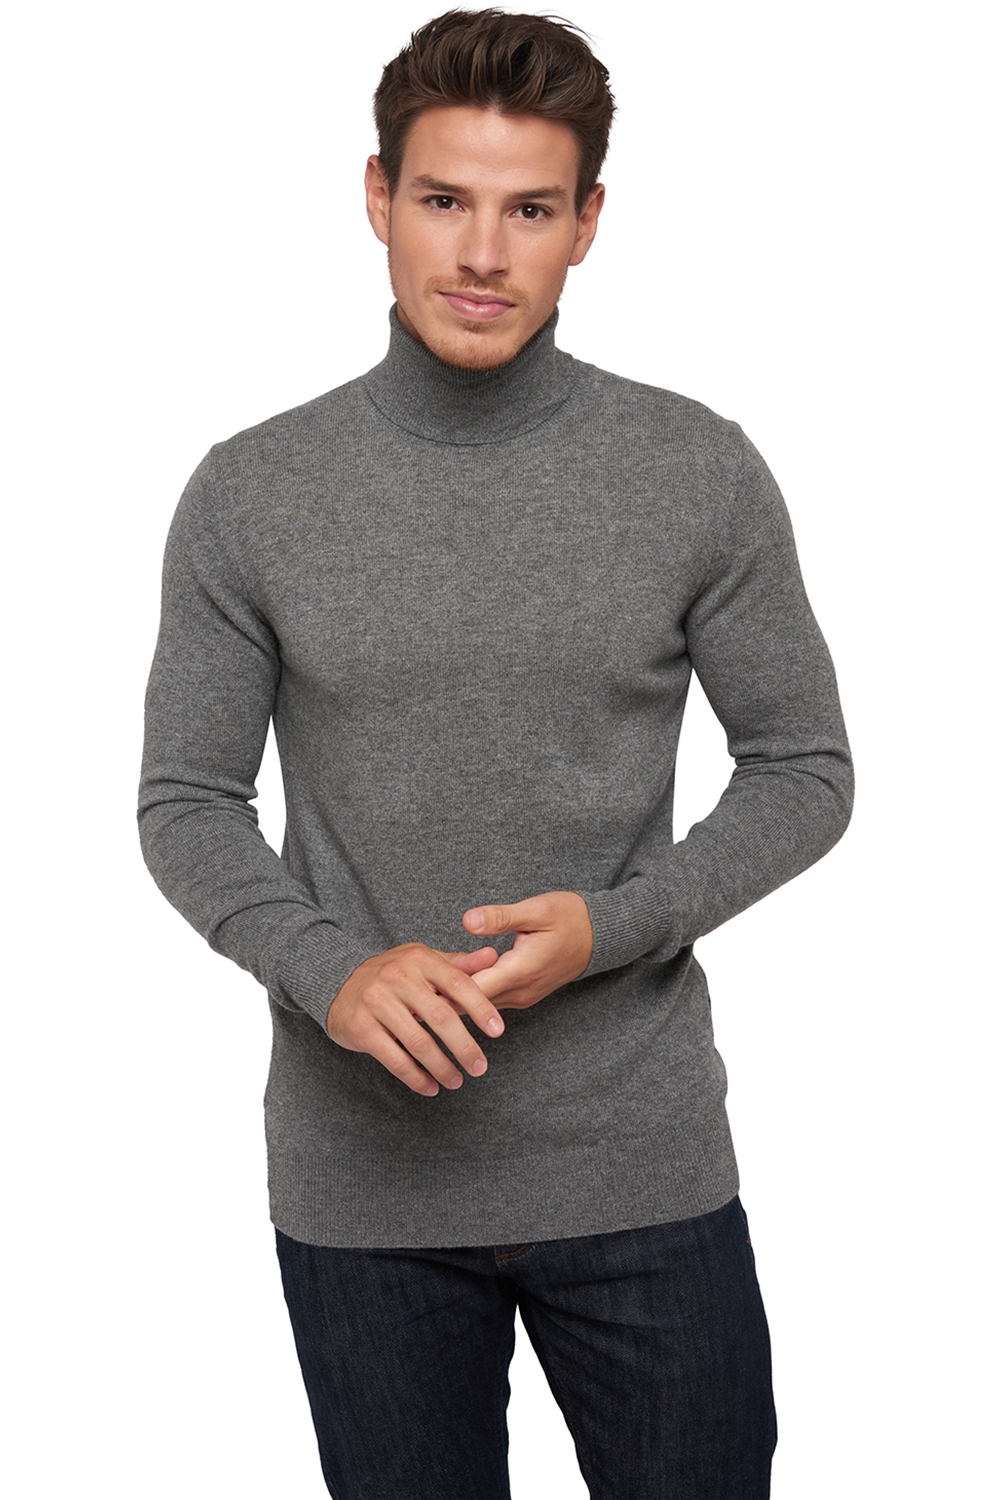 Cachemire petits prix homme tarry first gris chine l